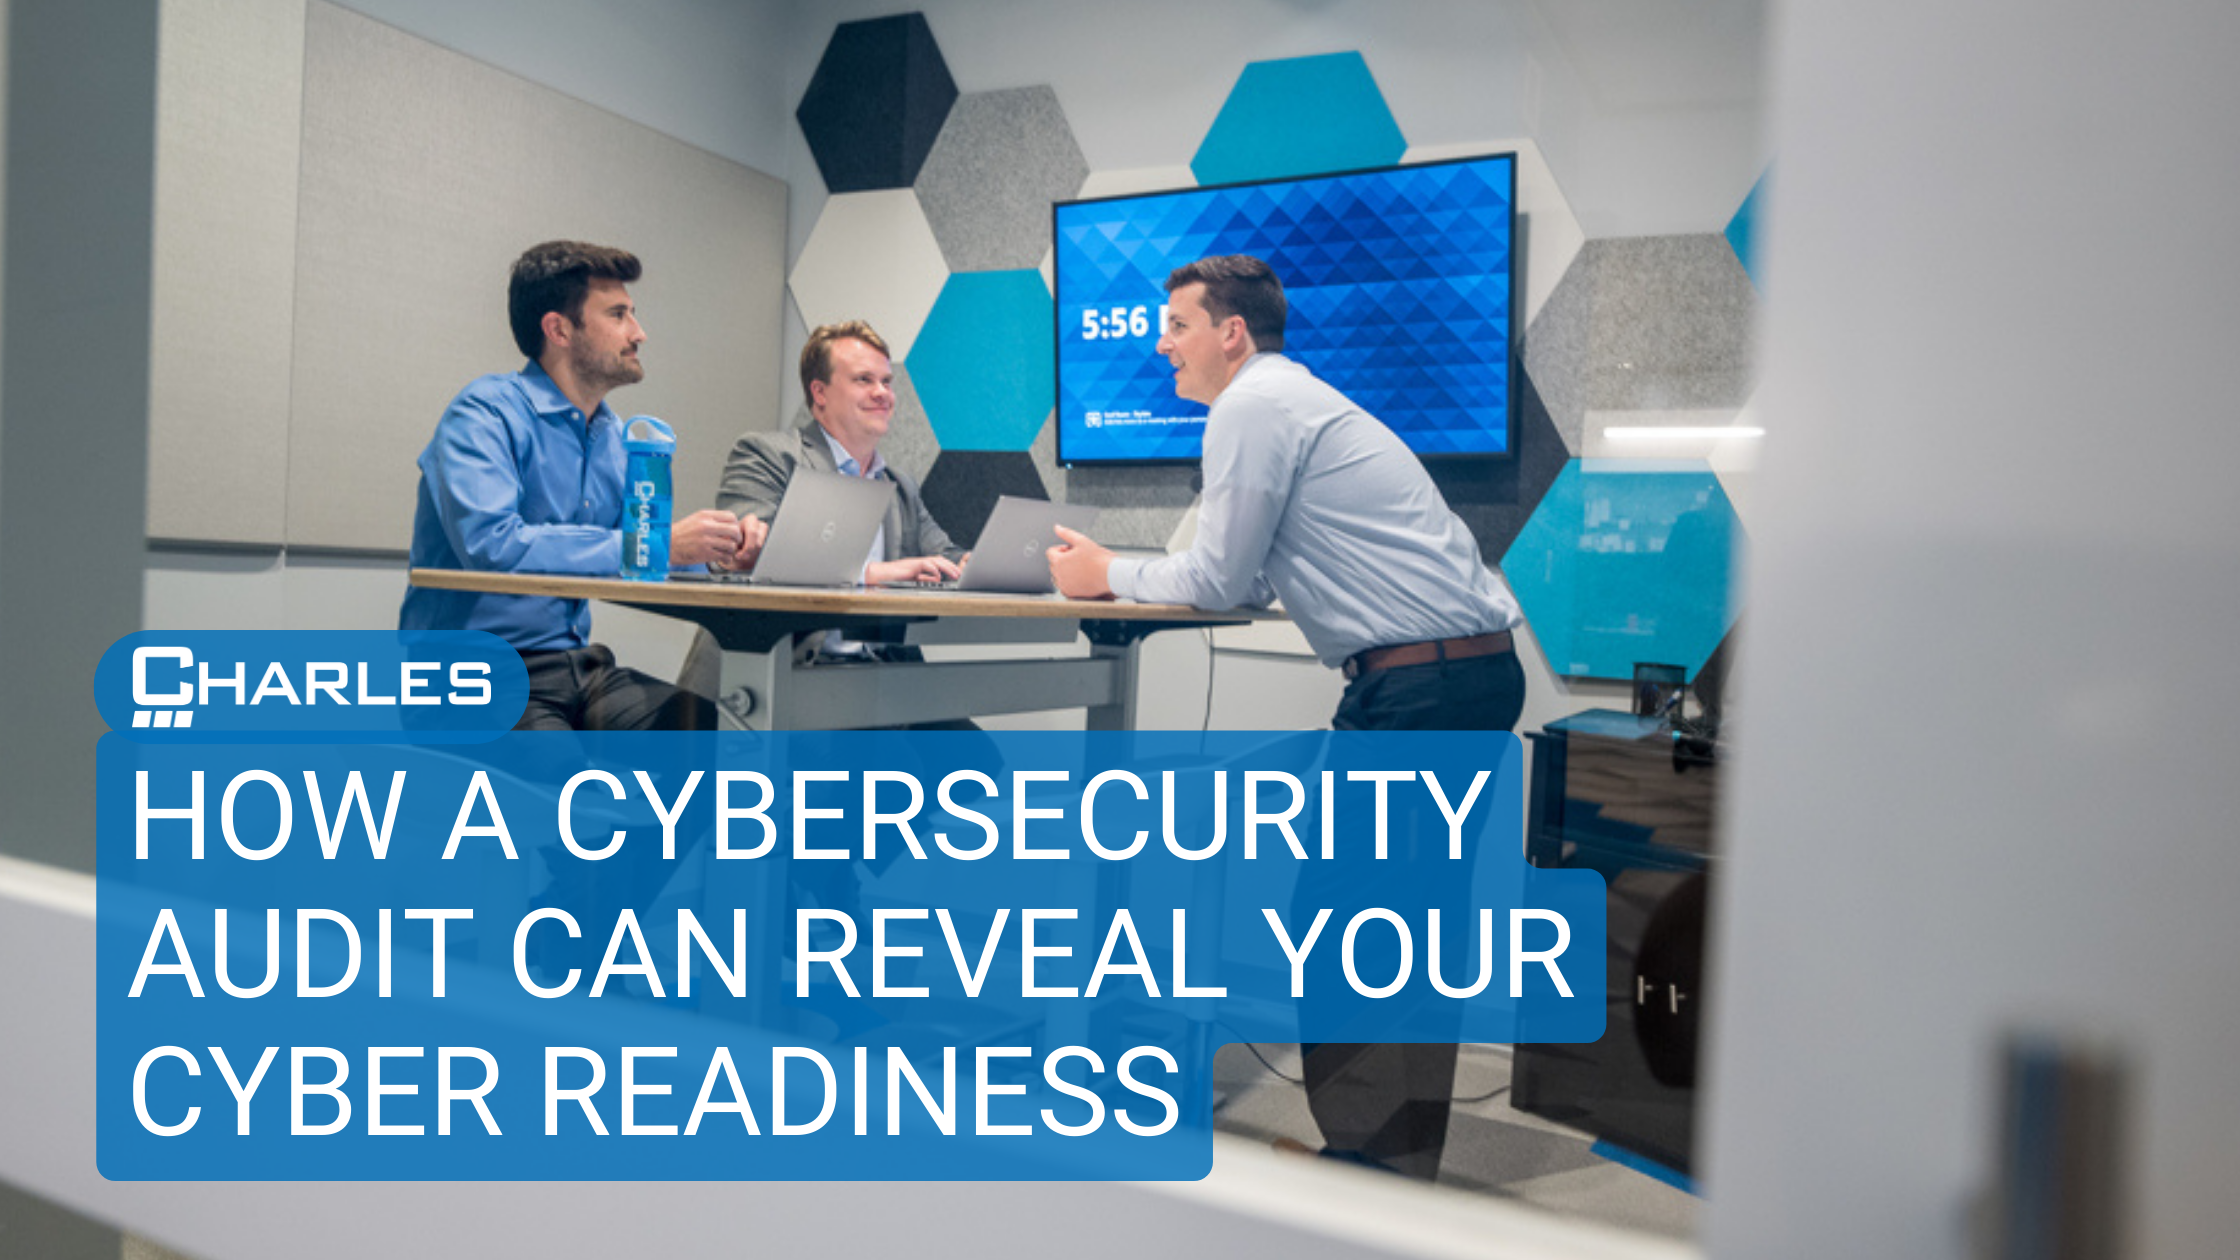 How A Cybersecurity Audit Can Reveal Your Cyber Readiness